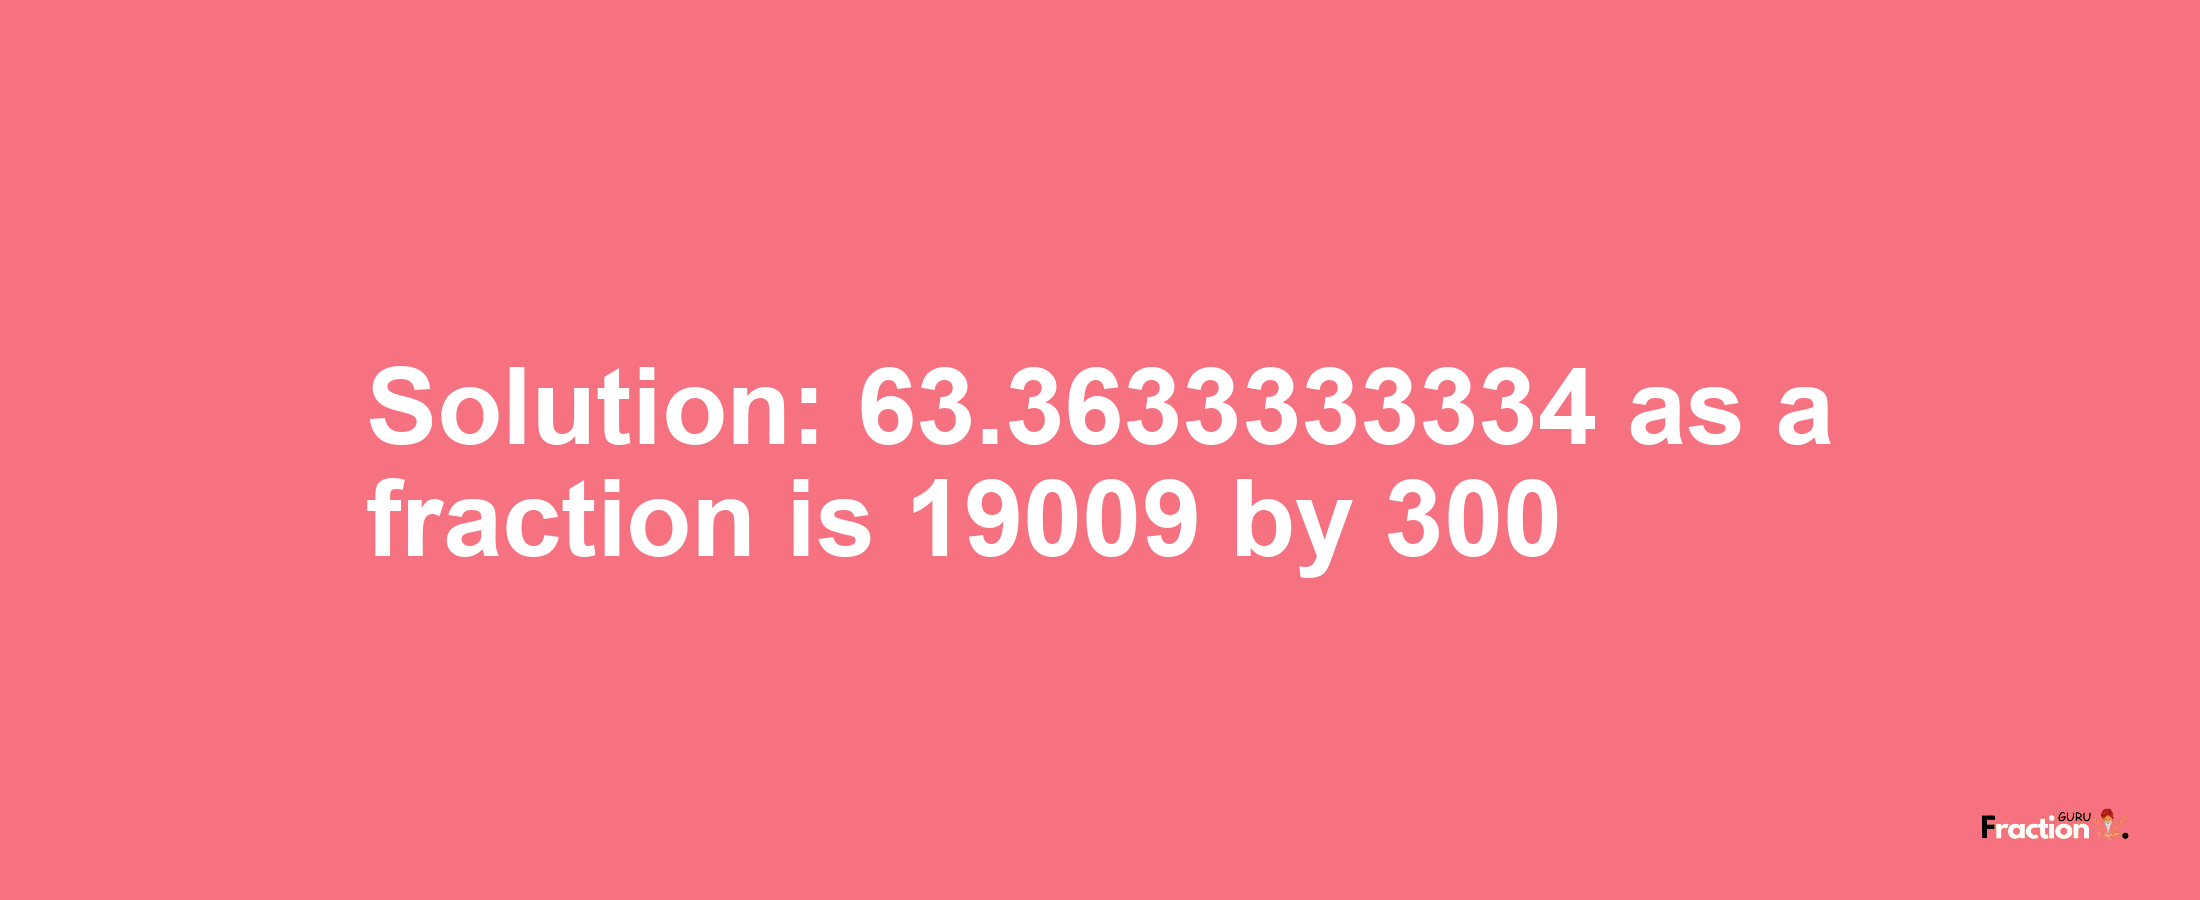 Solution:63.3633333334 as a fraction is 19009/300